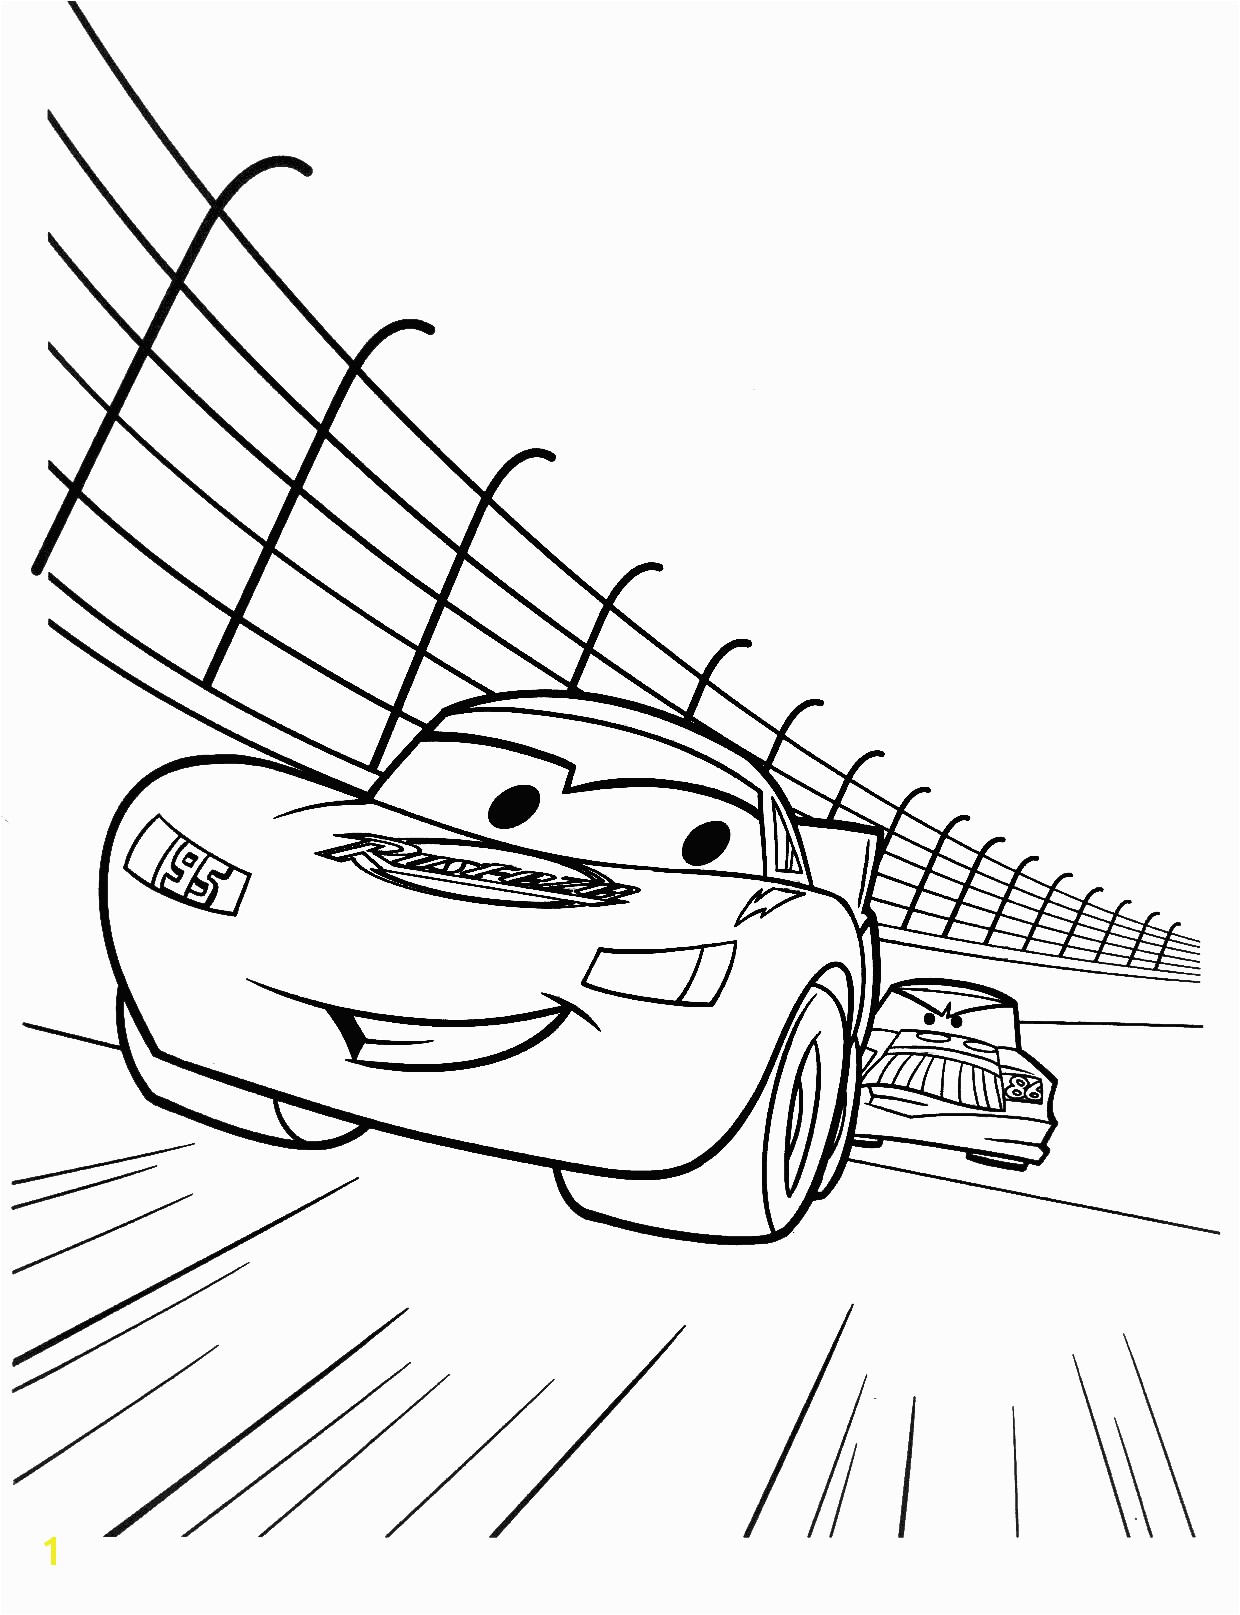 Free Lightning Mcqueen Coloring Pages Online Lightning Mcqueen and Chick Hicks Race Coloring Sheet Printable